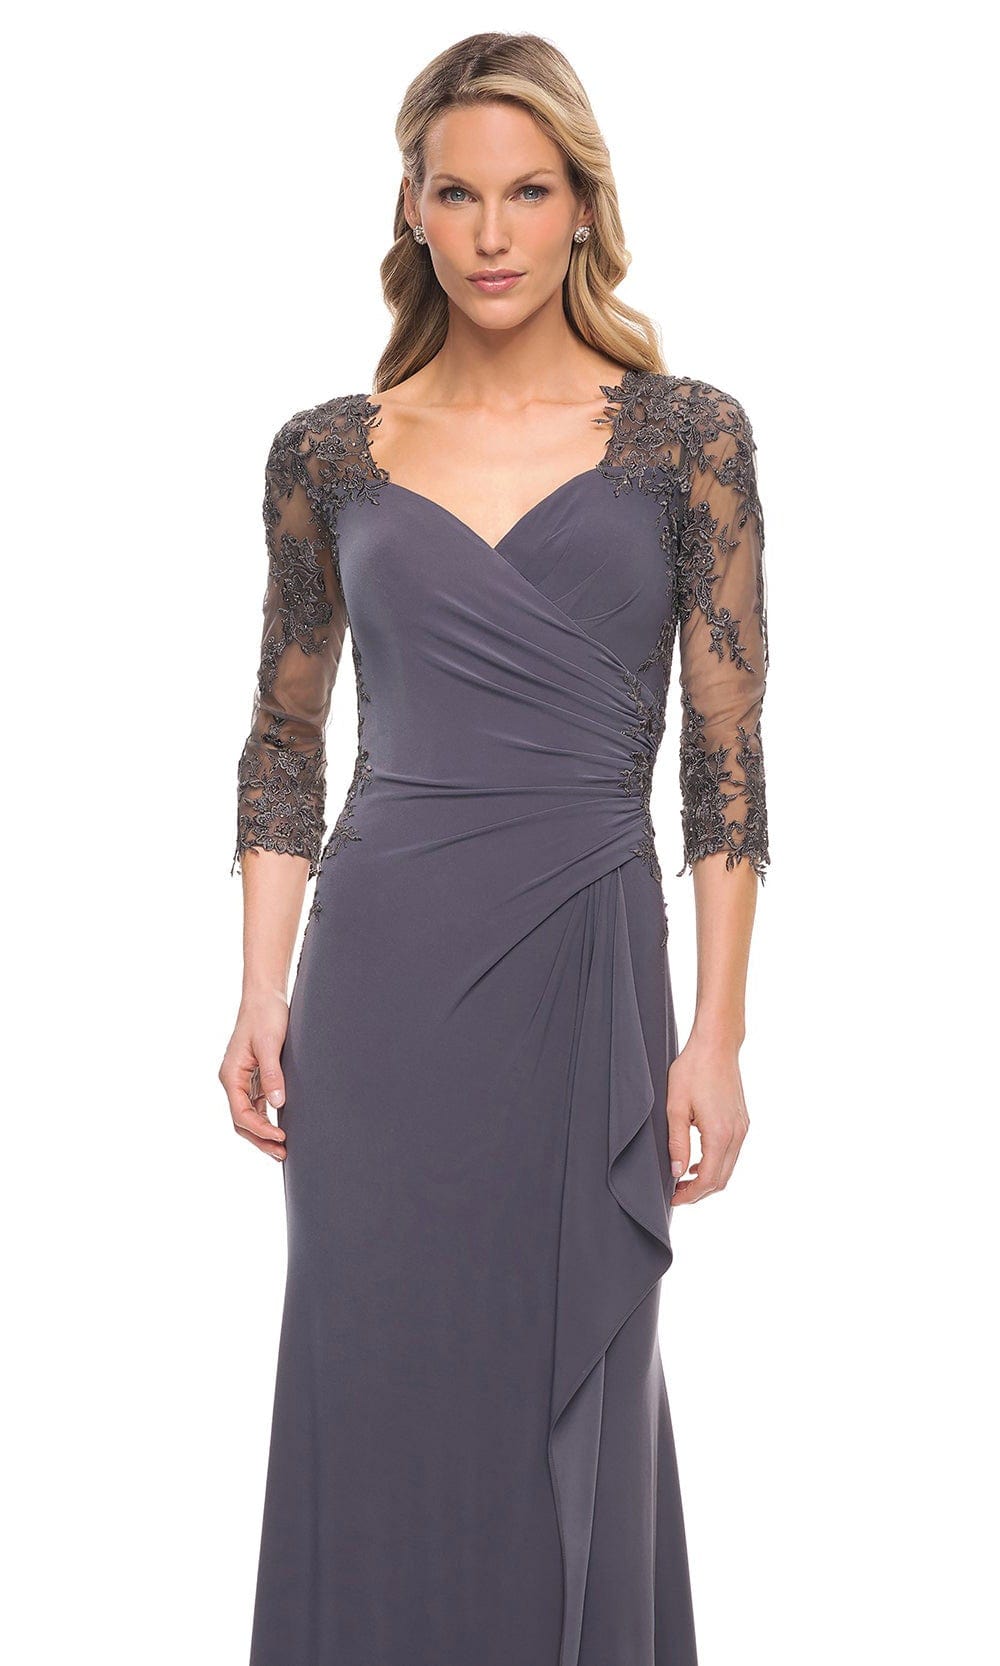 La Femme 30384 - Lace Covered Sleeves Net Jersey Gown Special Occasion Dress